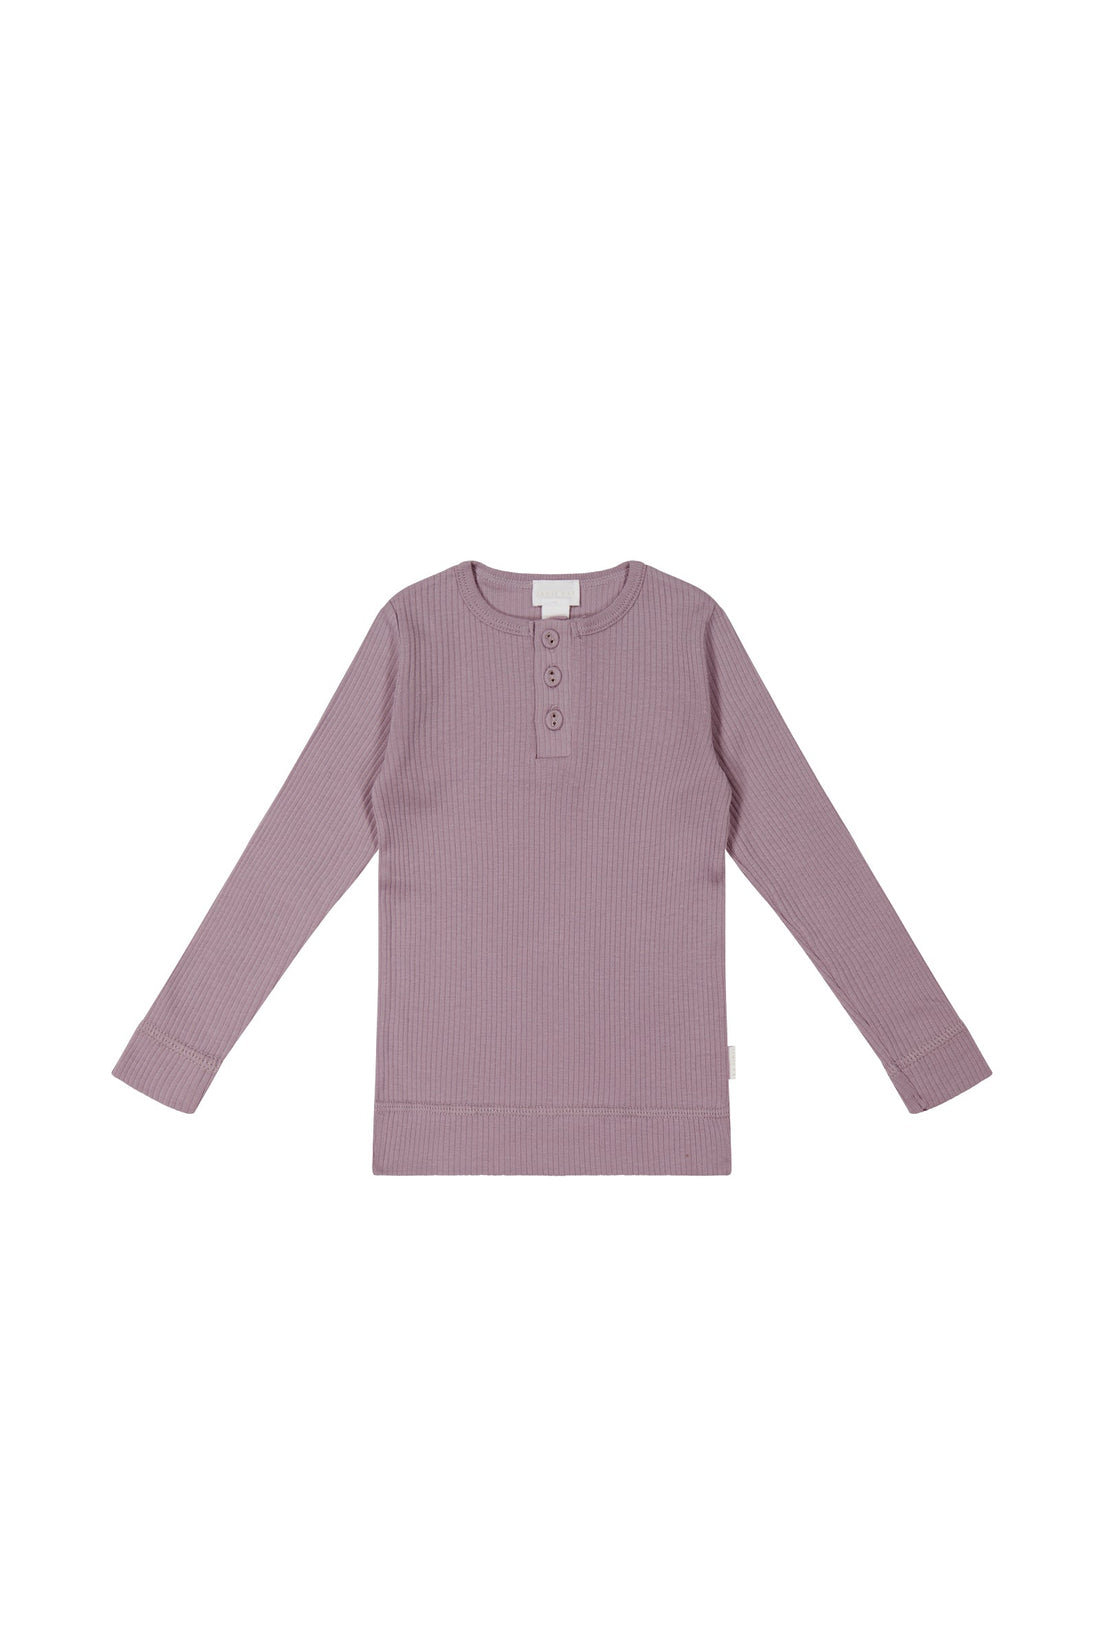 Organic Cotton Modal Long Sleeve Henley - Melody Childrens Top from Jamie Kay USA